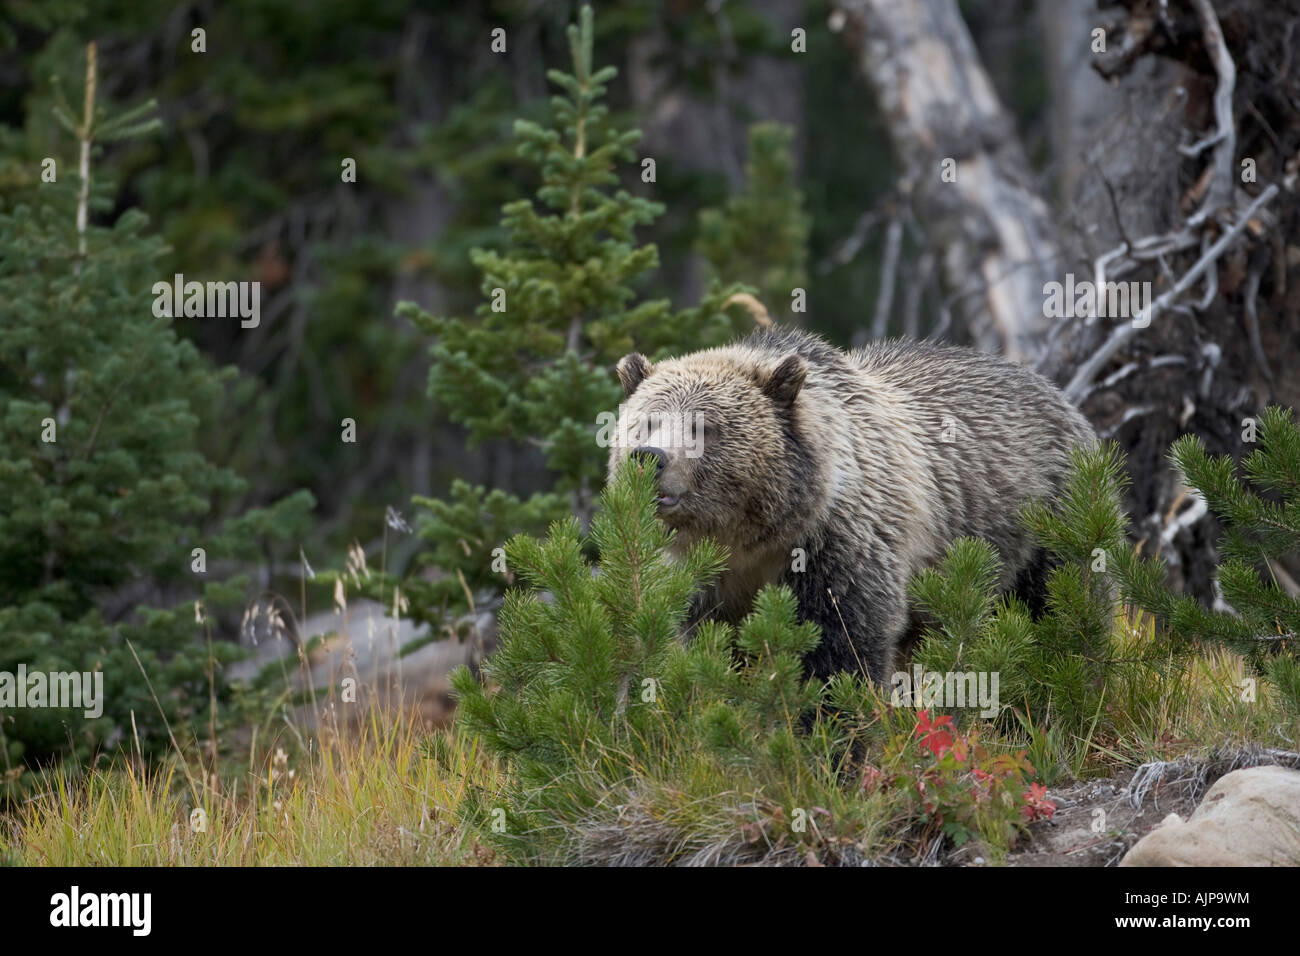 Grizzly bear in Yellowstone National Park Stock Photo